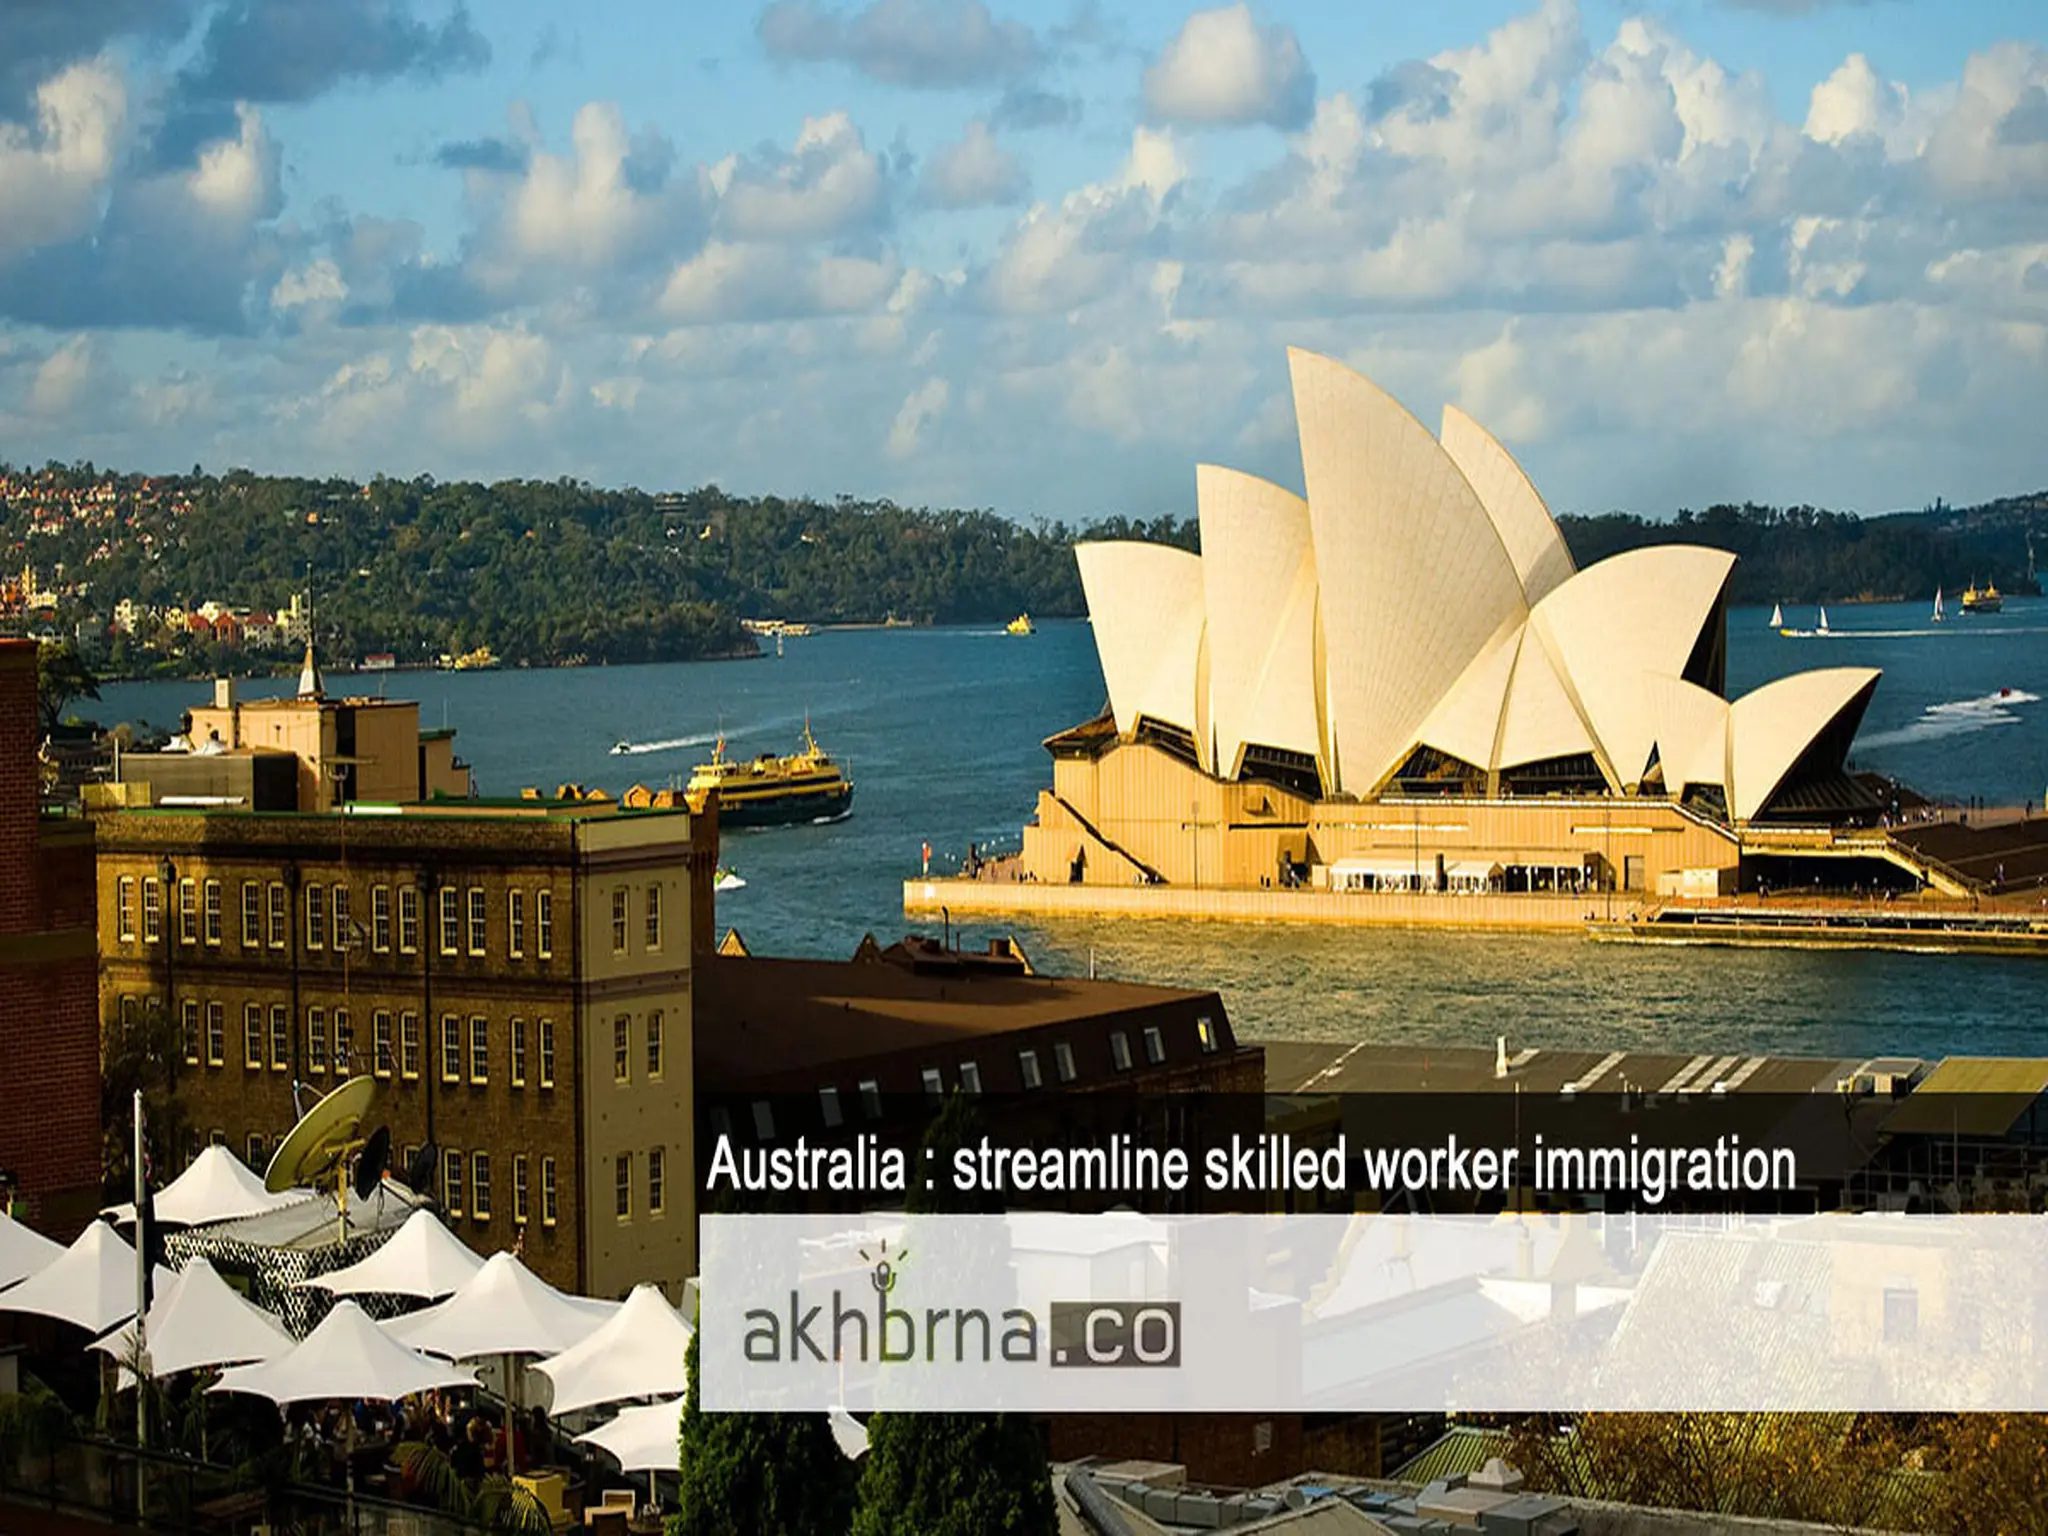 Australia will modernise its immigration policies in order to facilitate the entry of talented workers